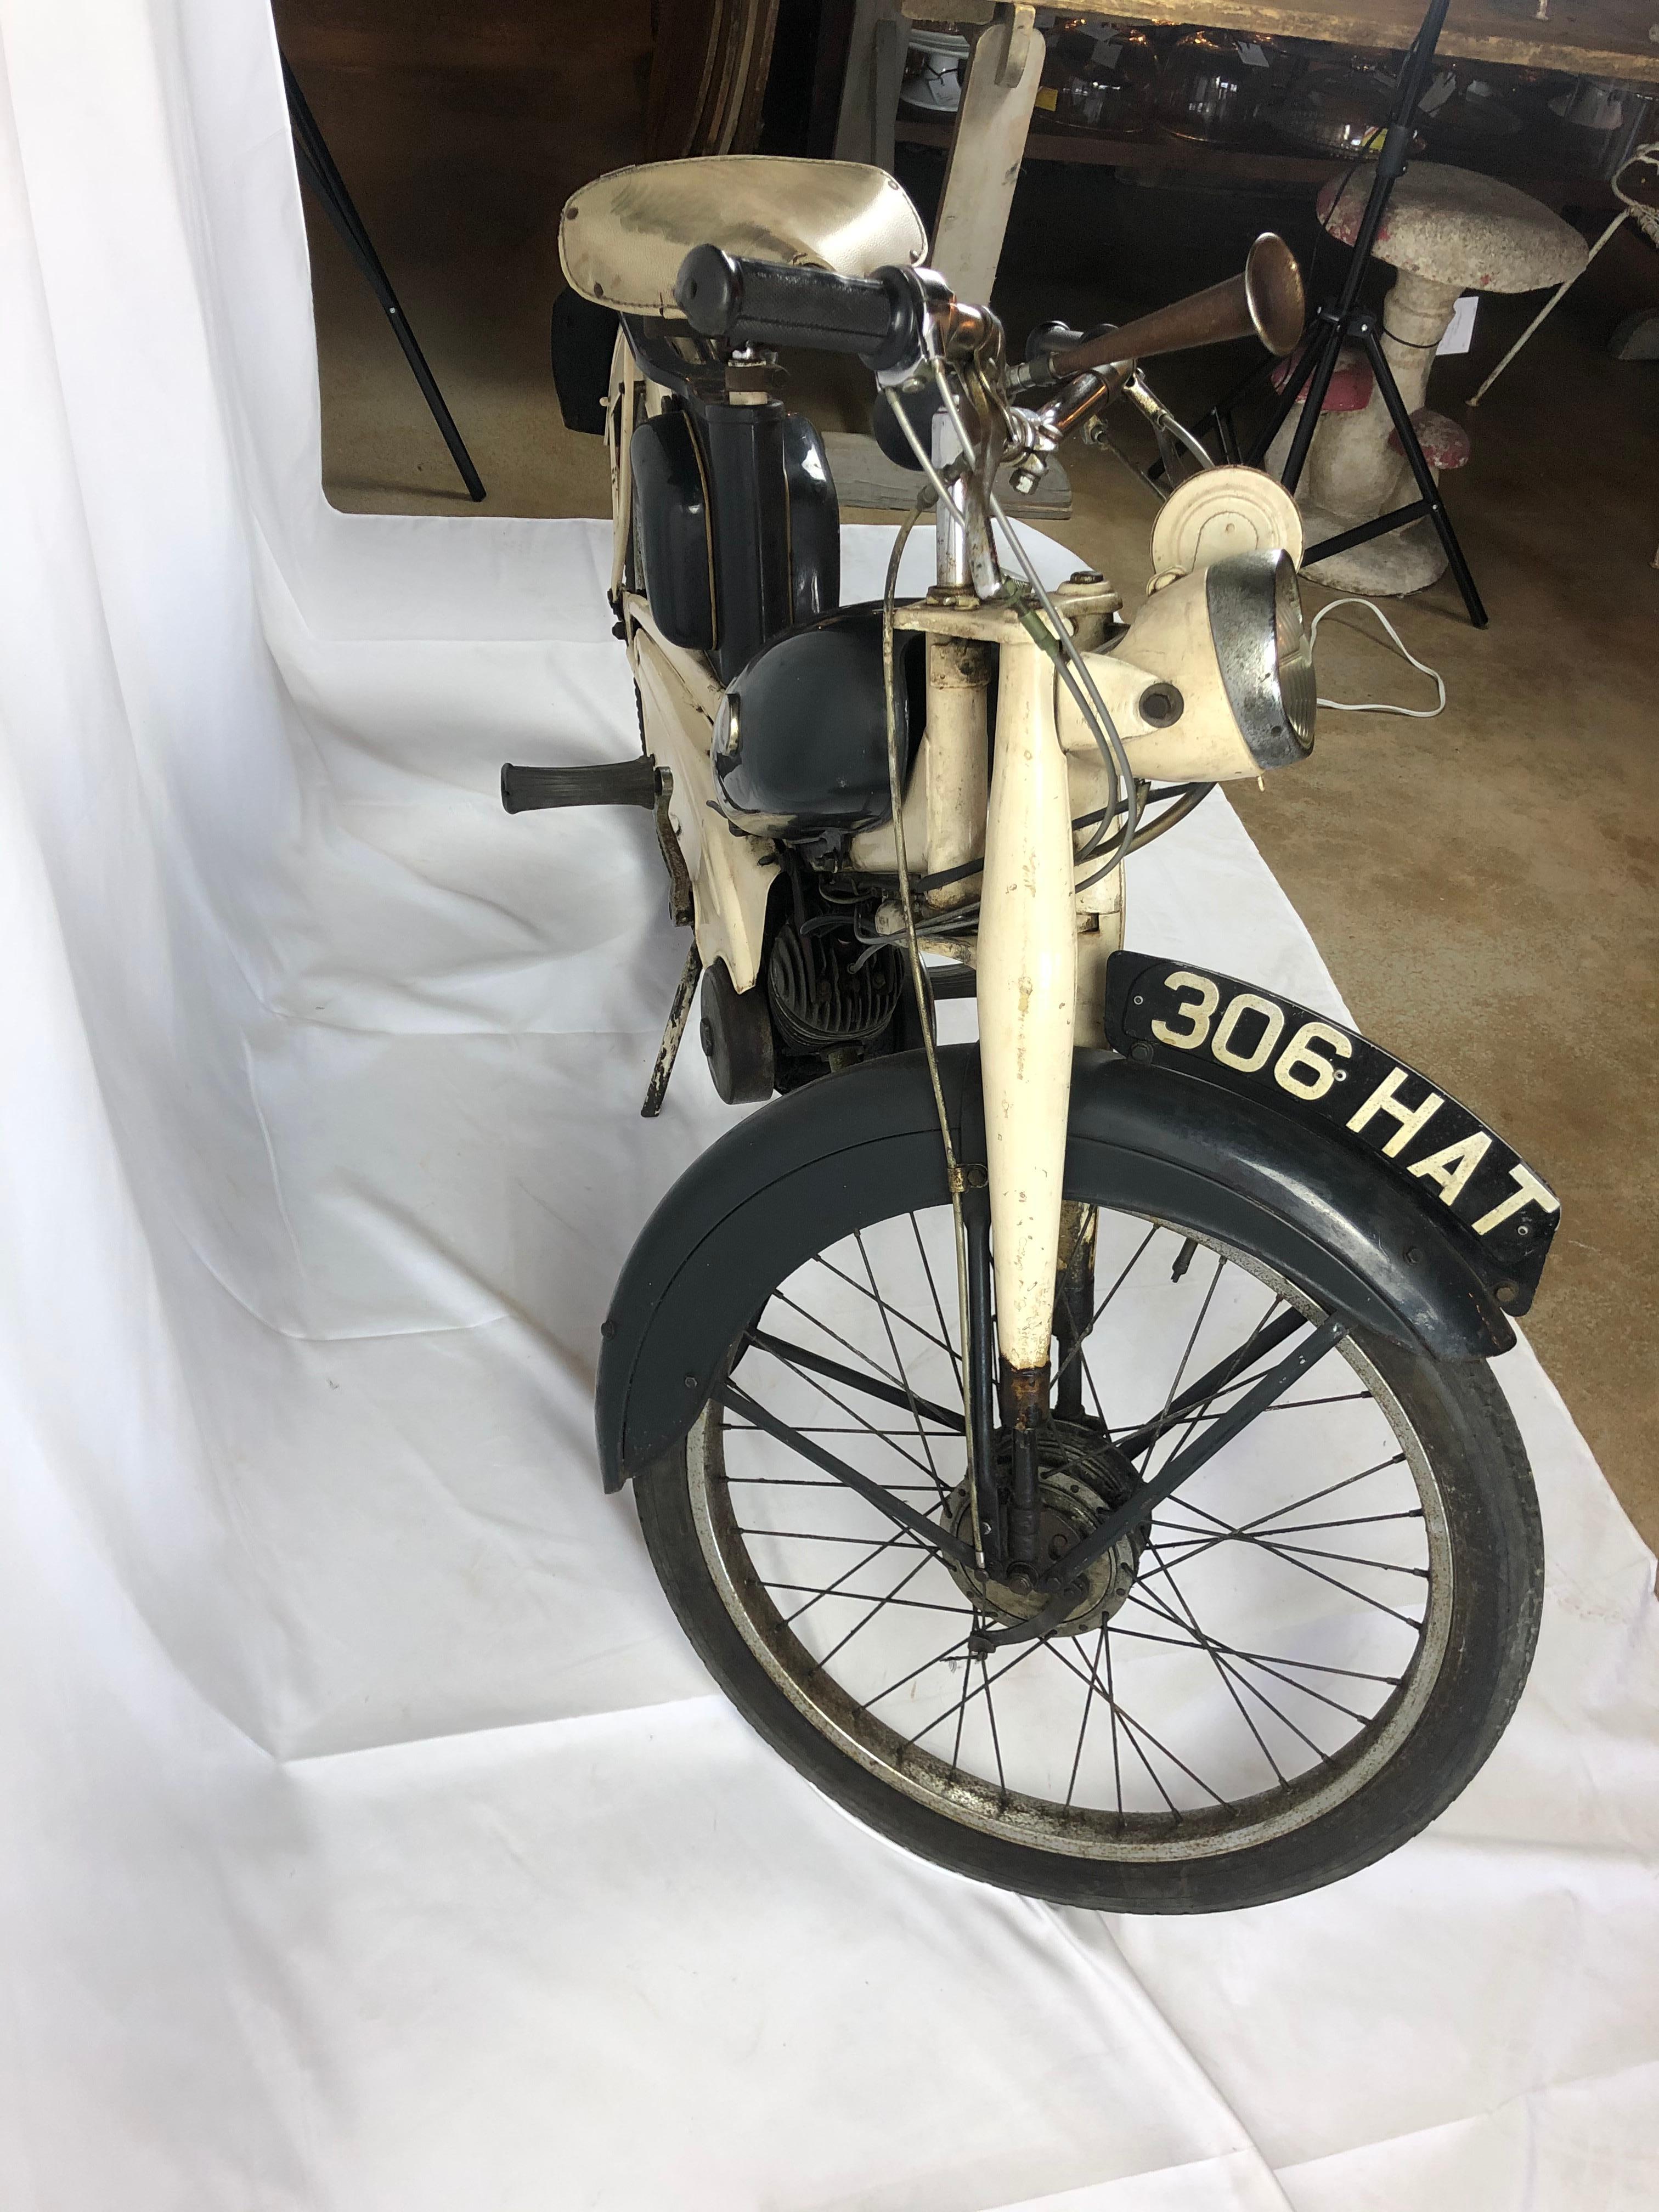 This is a 1964 Raleigh RM4 moped. The Raleigh Bicycle Company is a British bicycle manufacturer founded in 1885, it is one of the oldest and largest, bicycle companies in the world. Raleigh also produced motorcycles, mopeds and scooters under the